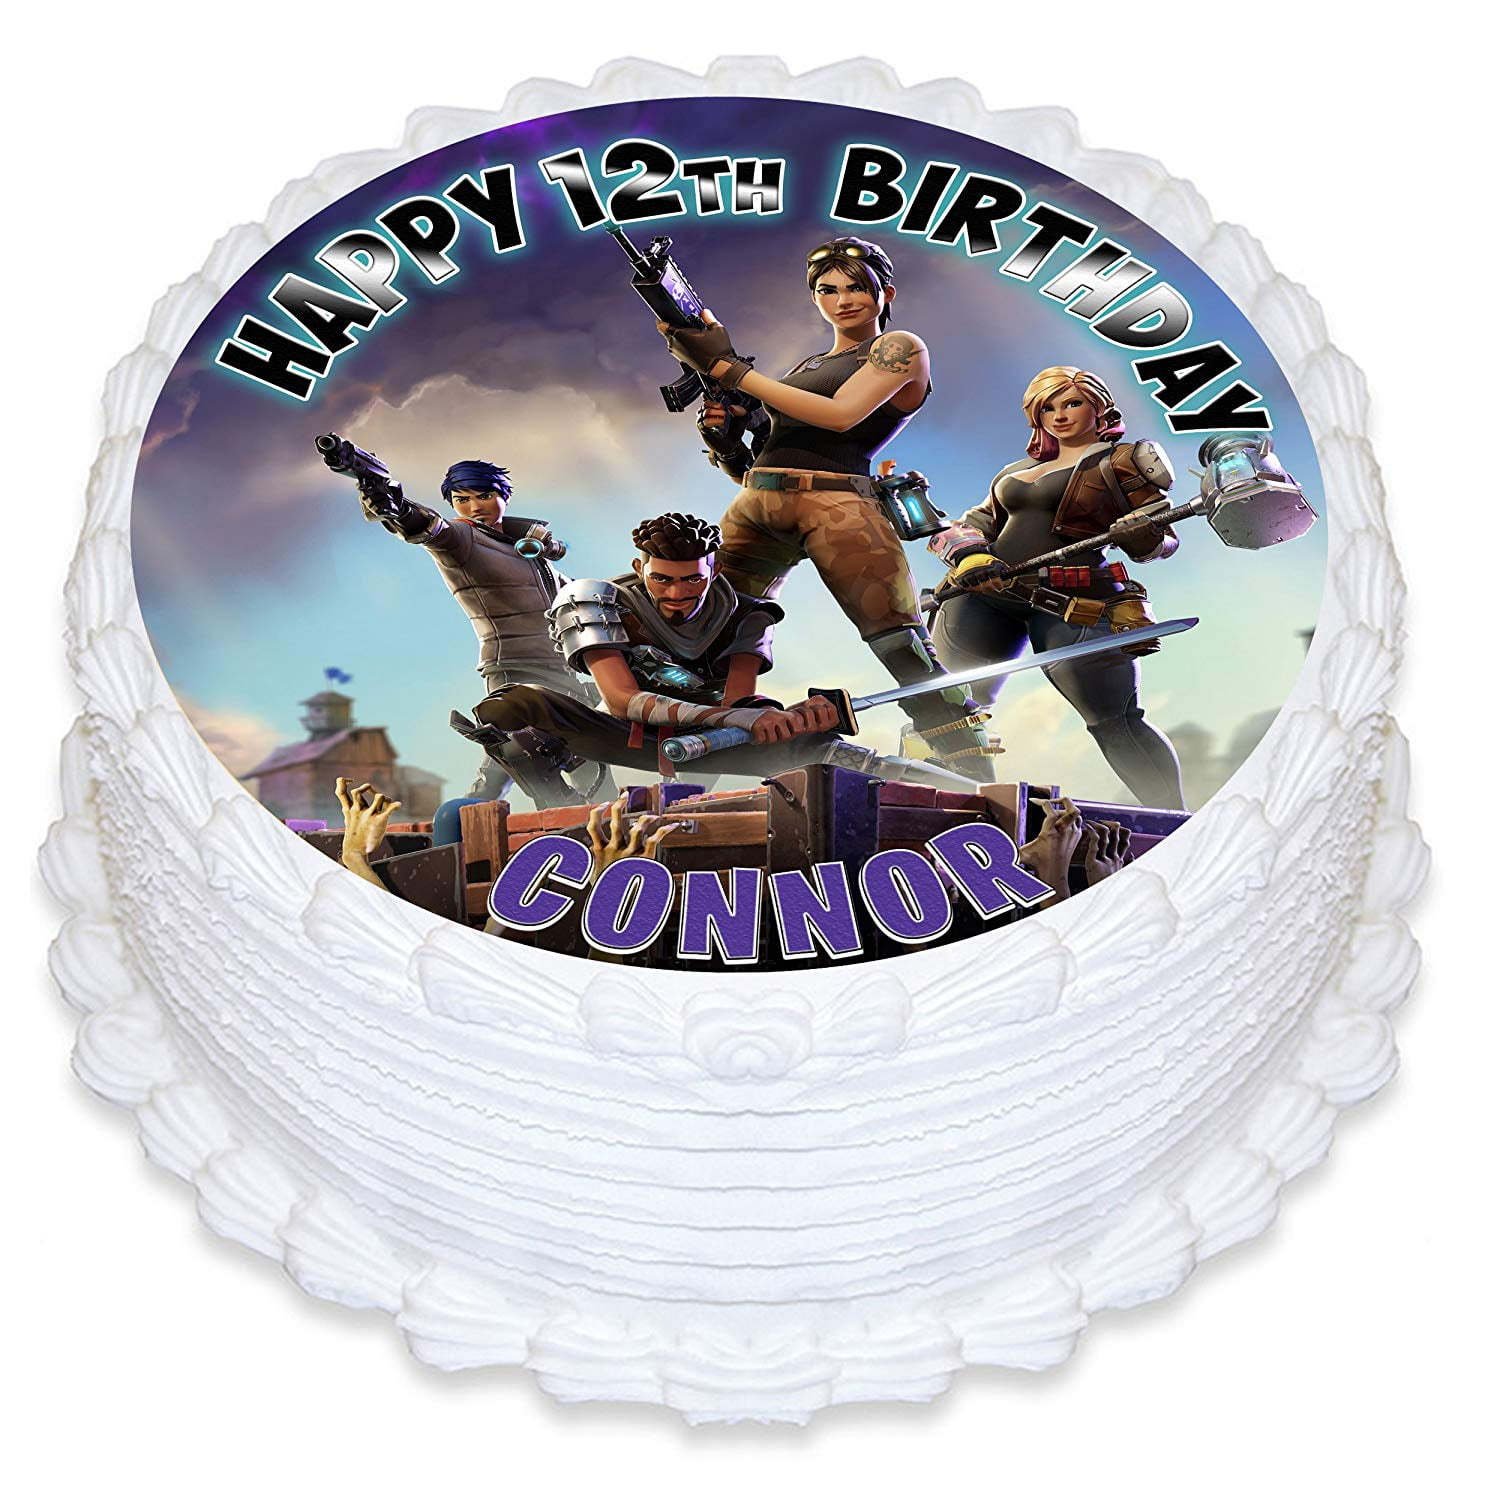 FORTNITE Edible Cake Image Topper Personalized Picture 8 Inches Round